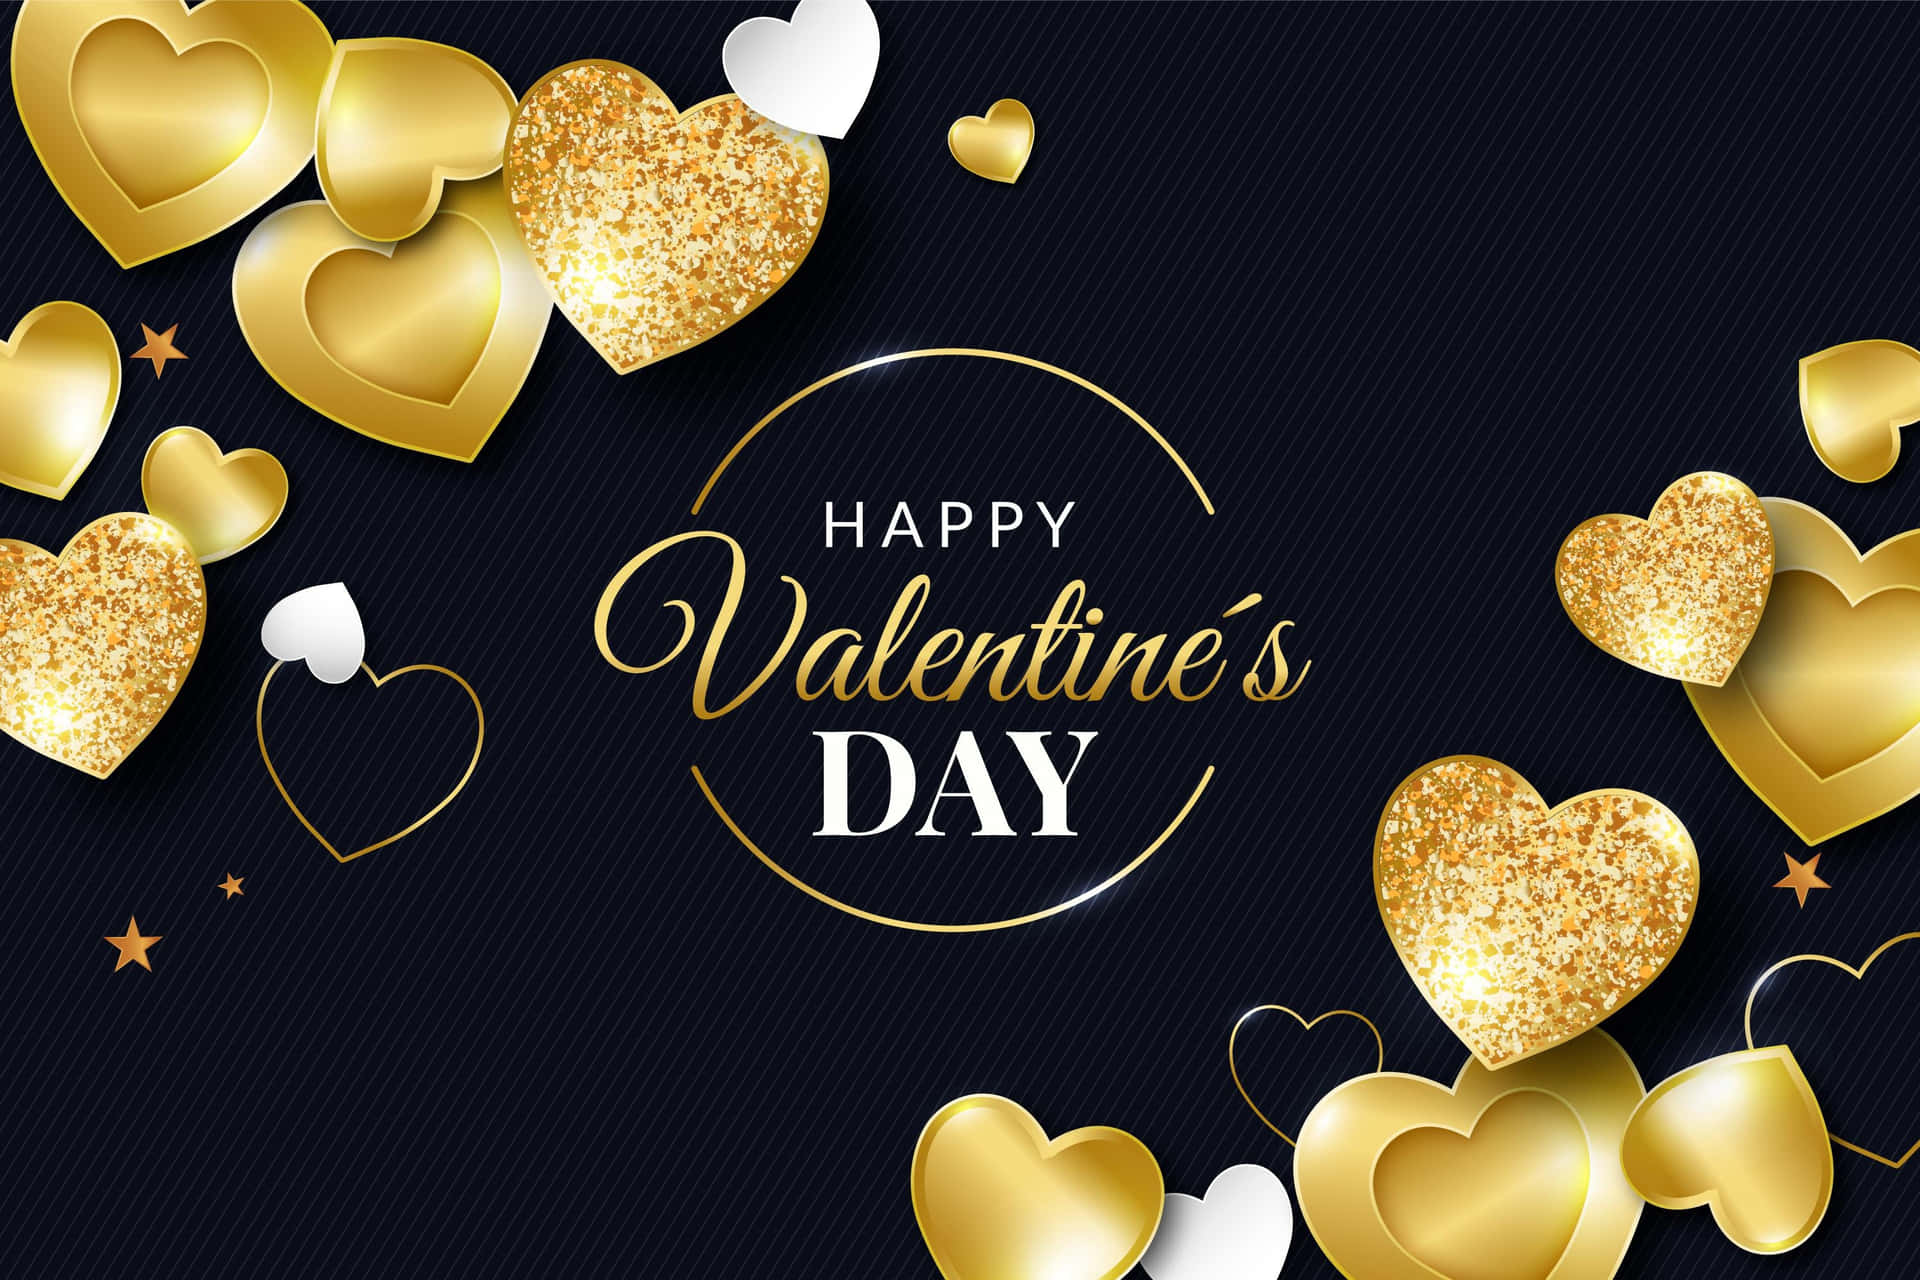 Happy Valentine's Day With Gold Hearts On A Black Background